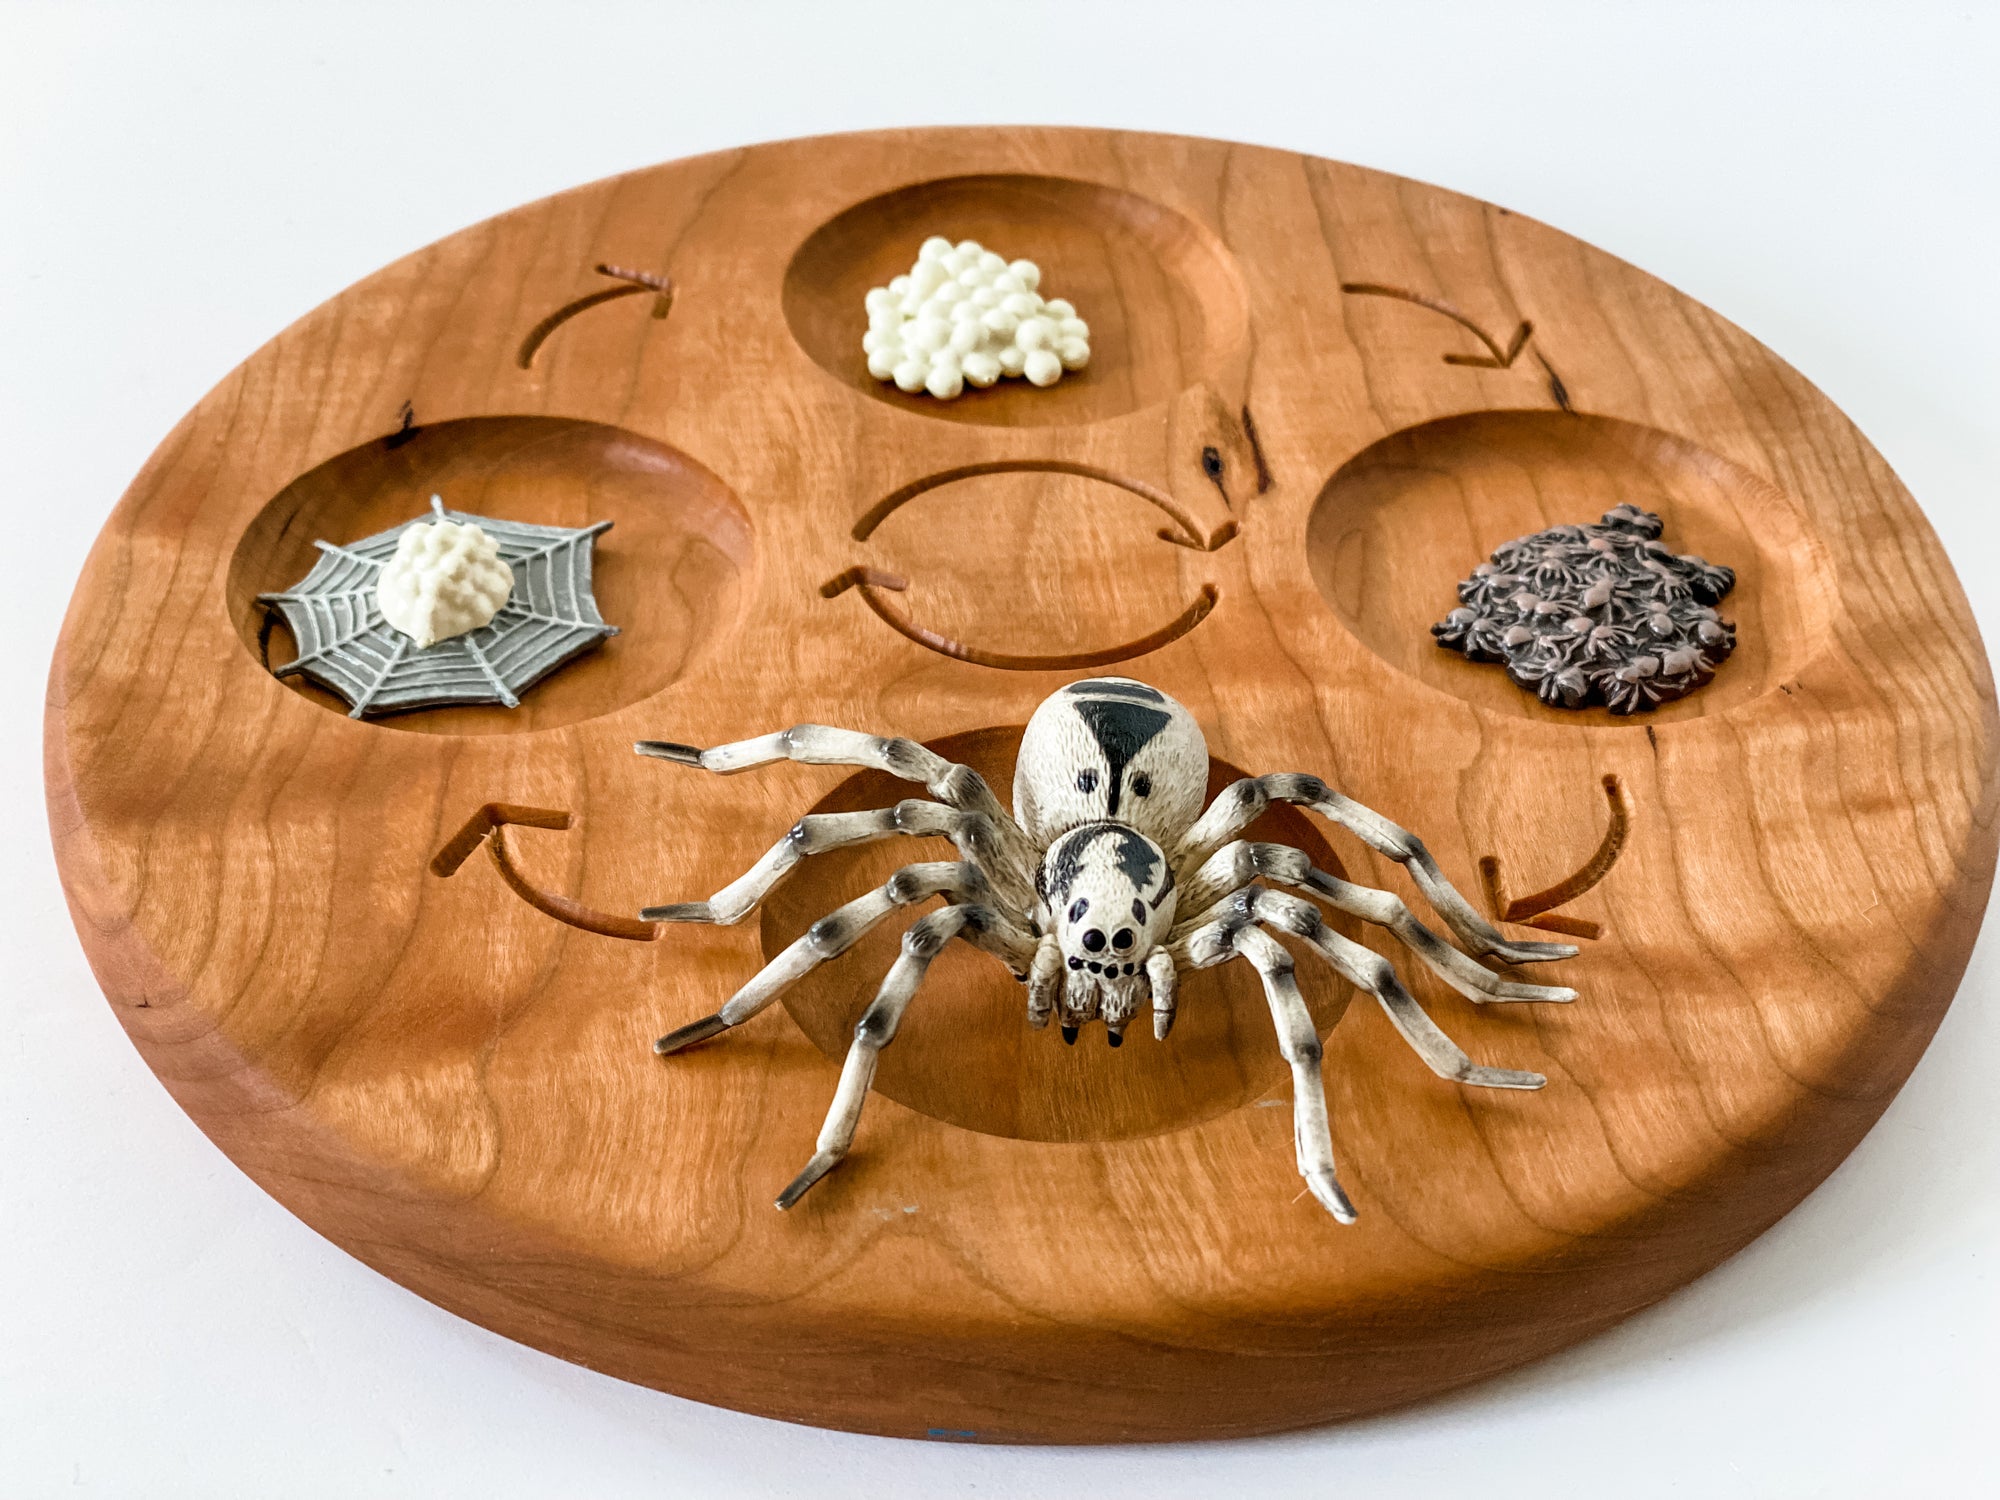 Jumping Spider Life Cycle Figurines